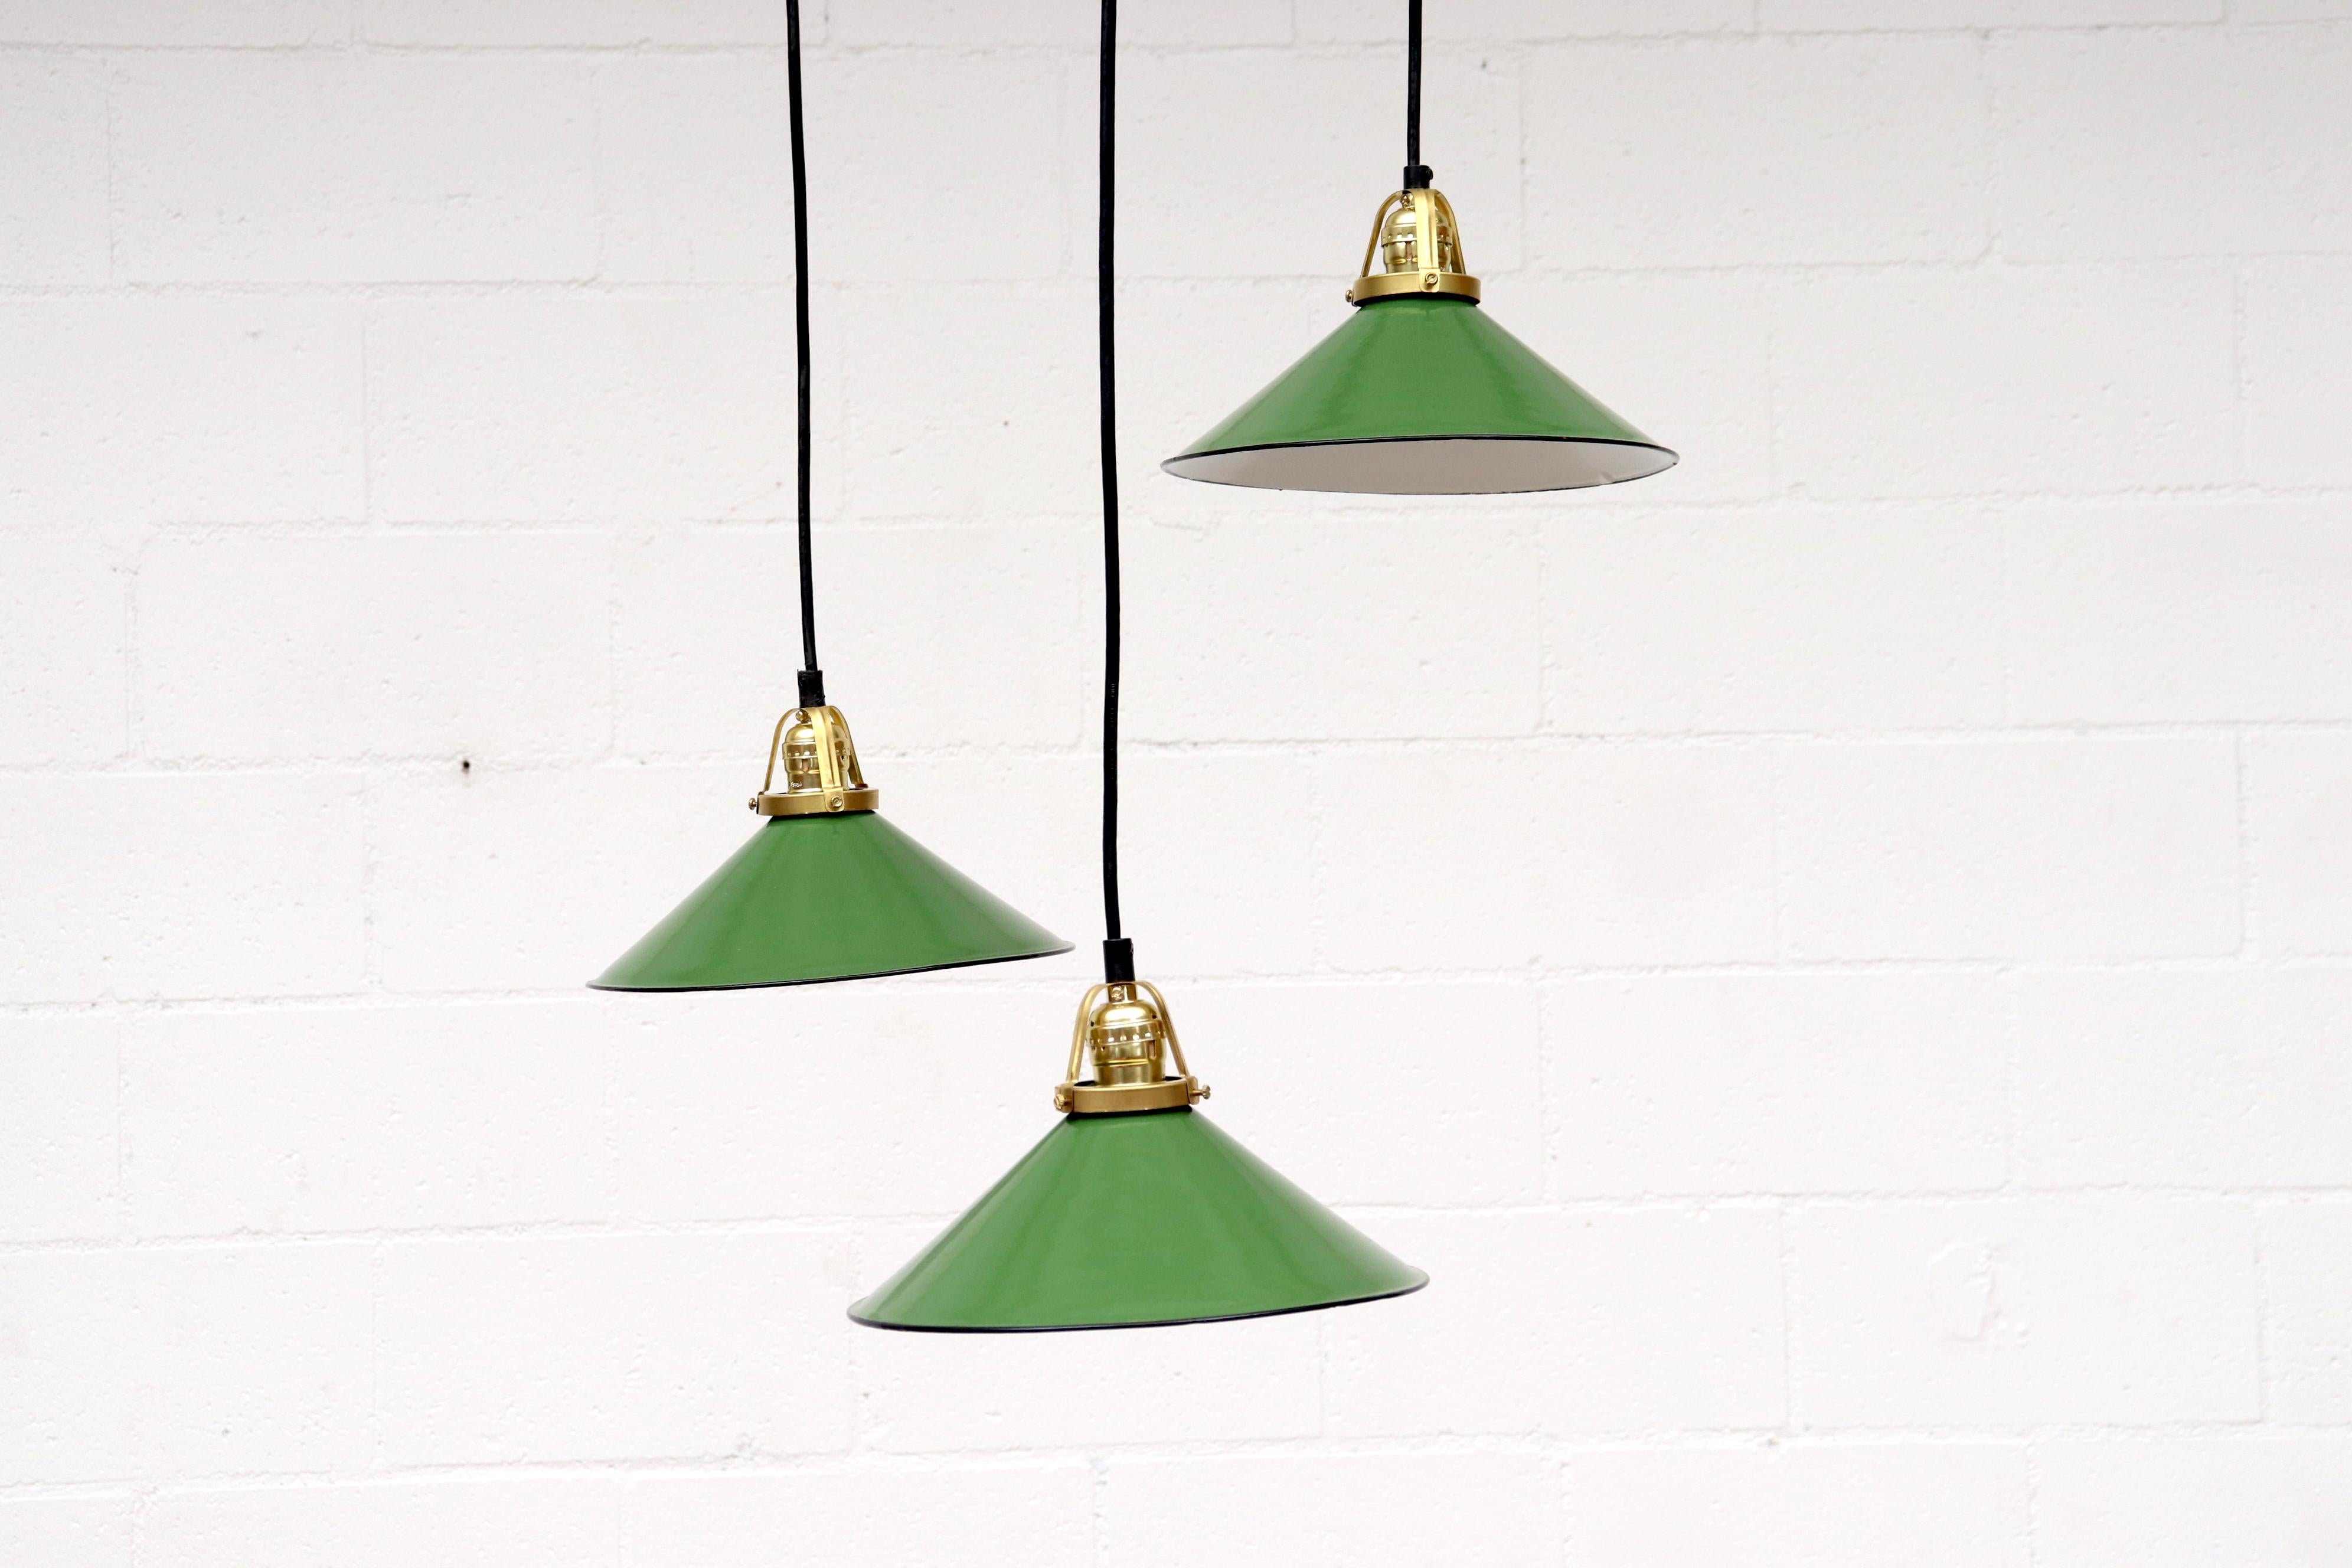 French industrial Minimalist pendant lights. Green enameled metal discs with new brass hardware. Shades in original condition with some enamel wear and moderate visible scratching. Wear is consistent with their age. Shapes and sizes may vary